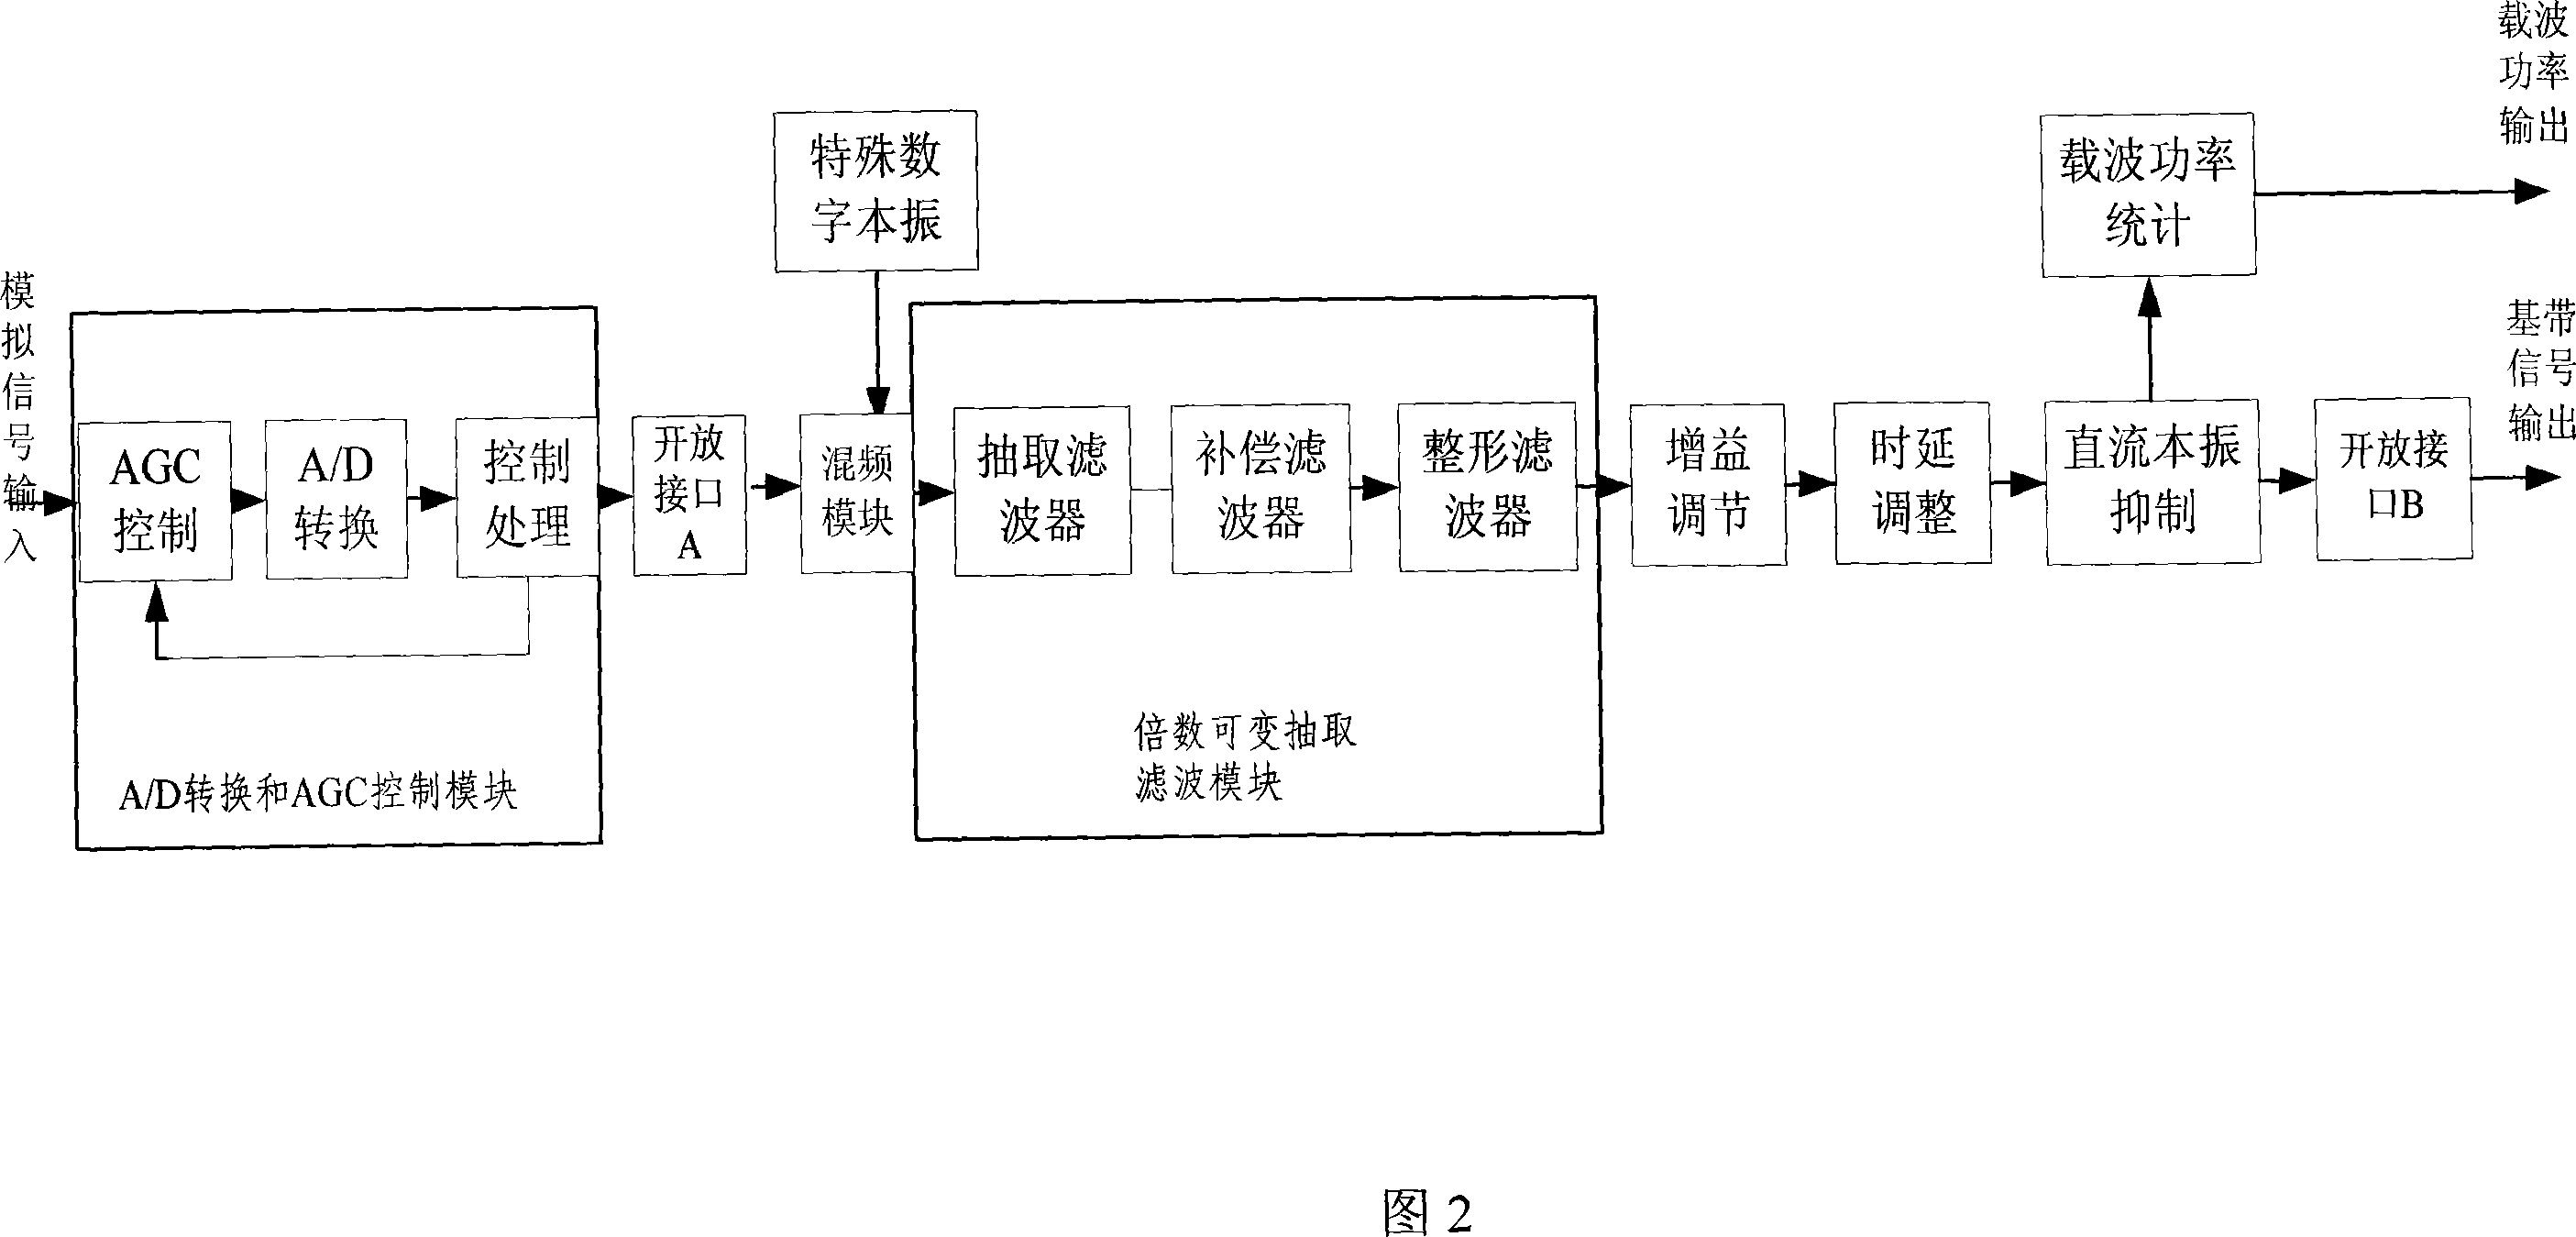 A digital variable-frequency system and its signal processing method